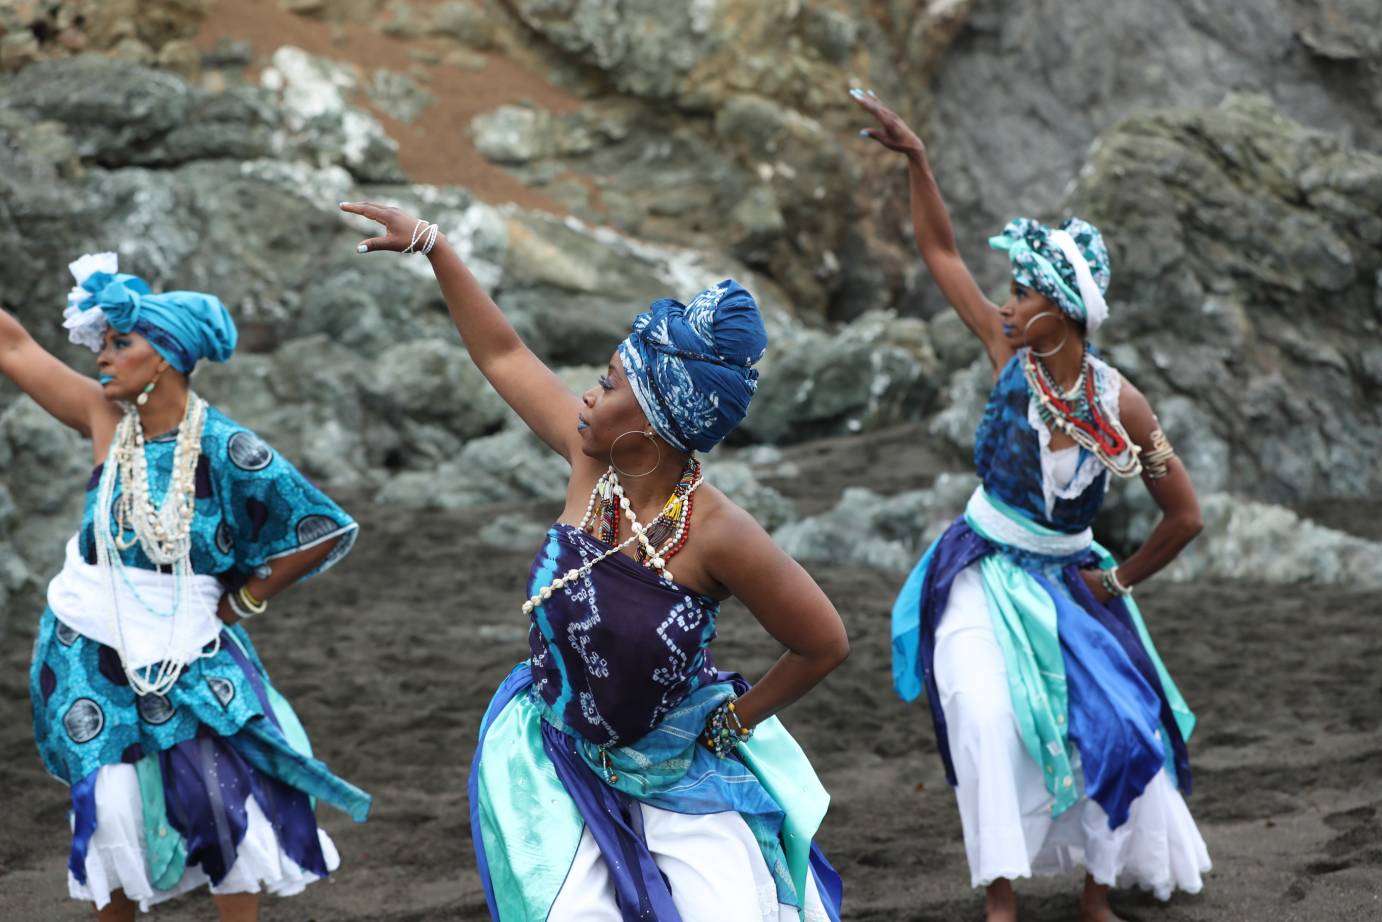 Three women in costumes of many shades of blue, lift one arm against a backdrop of rocks